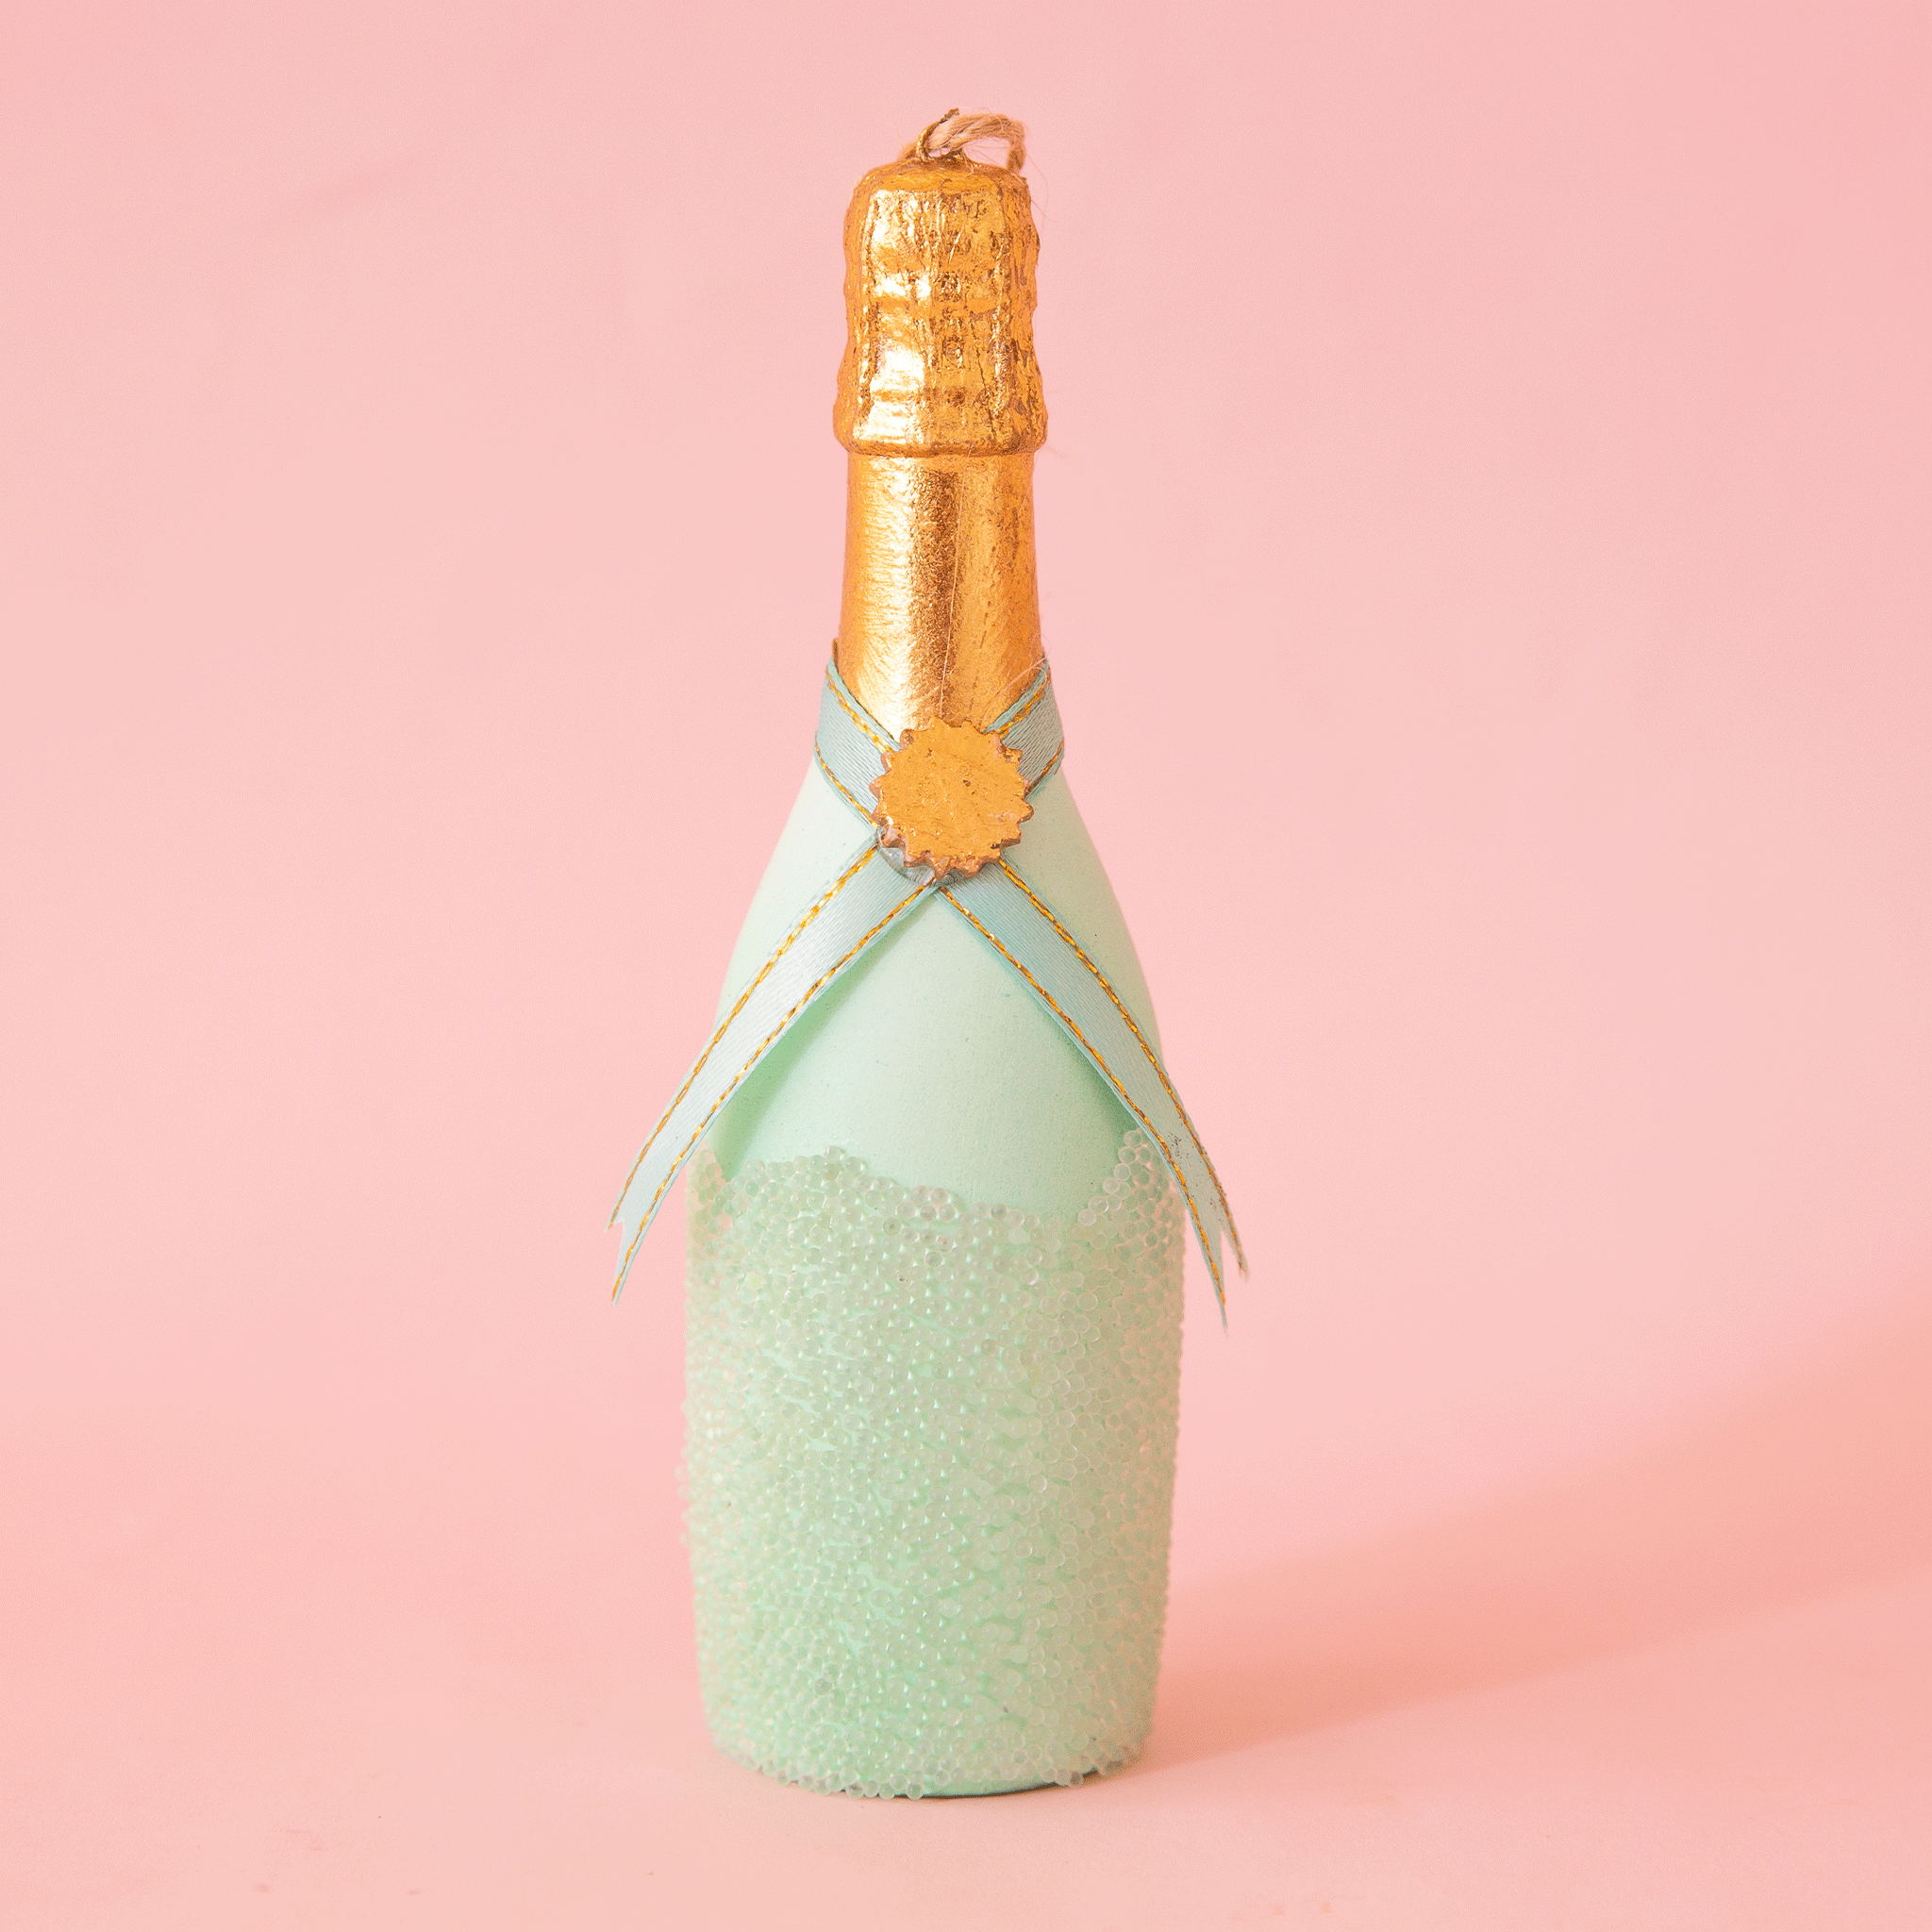 On a pink background is a mint green champagne bottle shaped ornament.